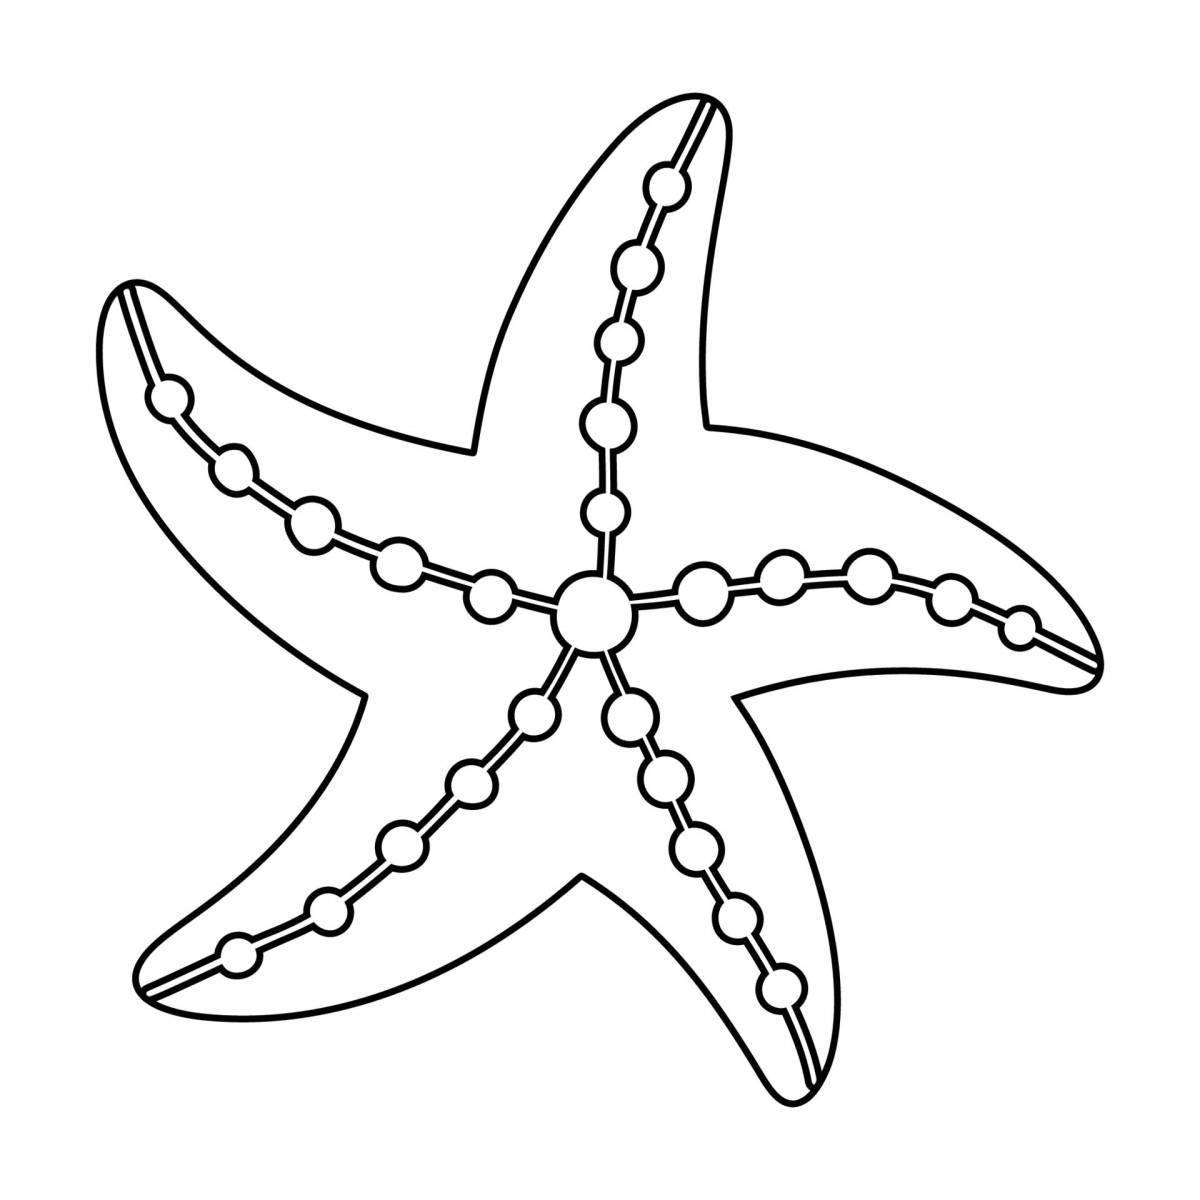 Shiny starfish coloring pages for kids